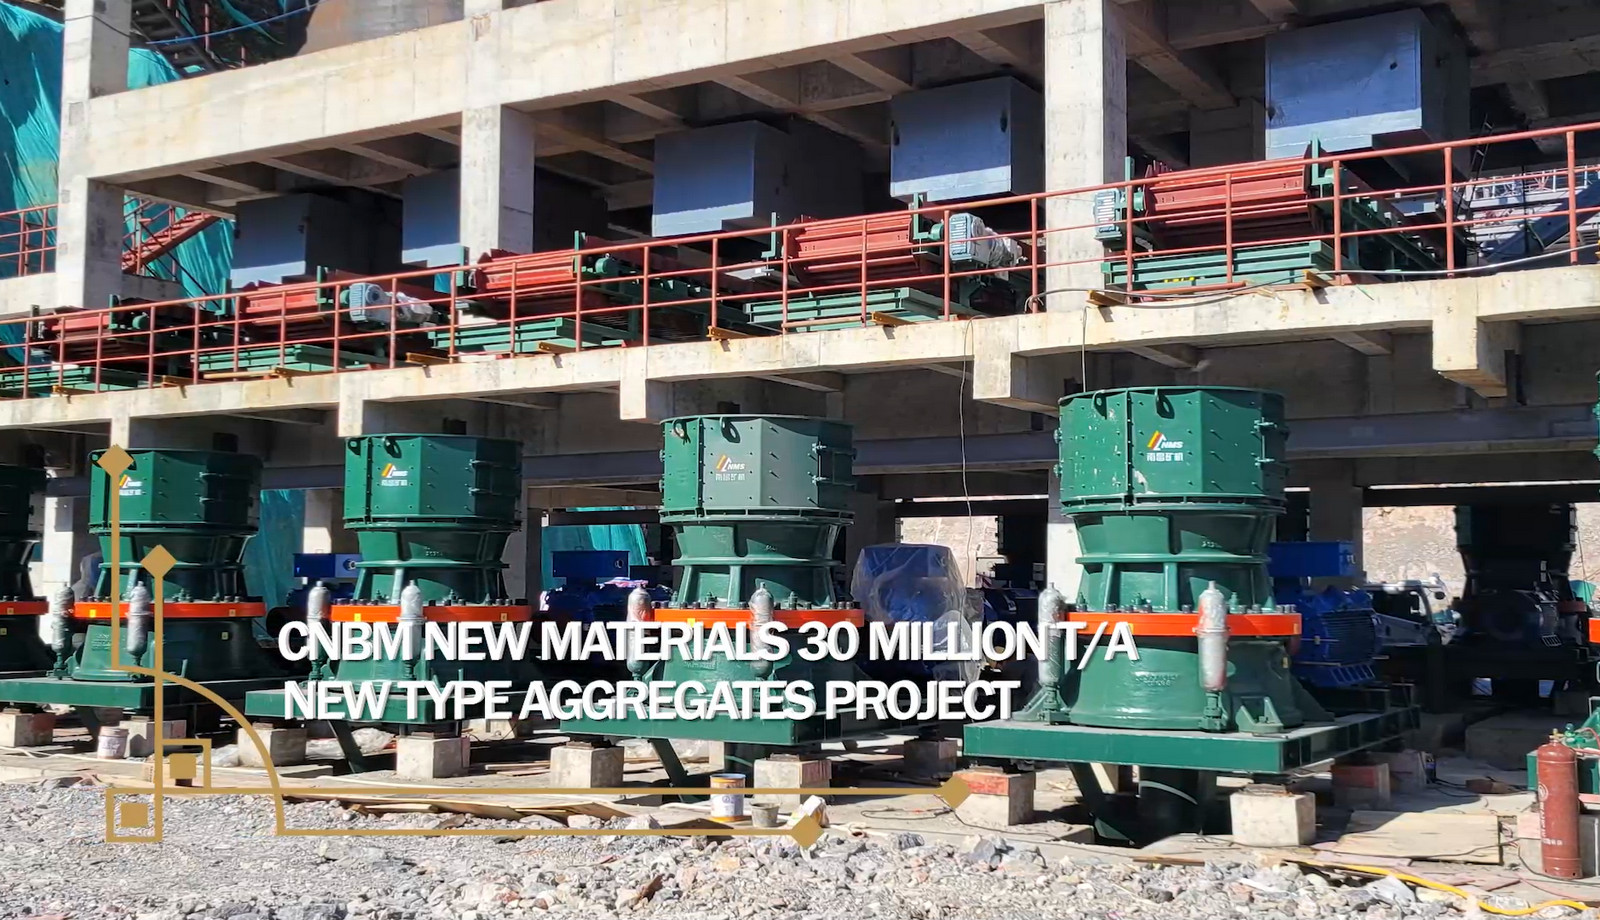 CNBM New Materials 30 Million t/a New Type Aggregates Project